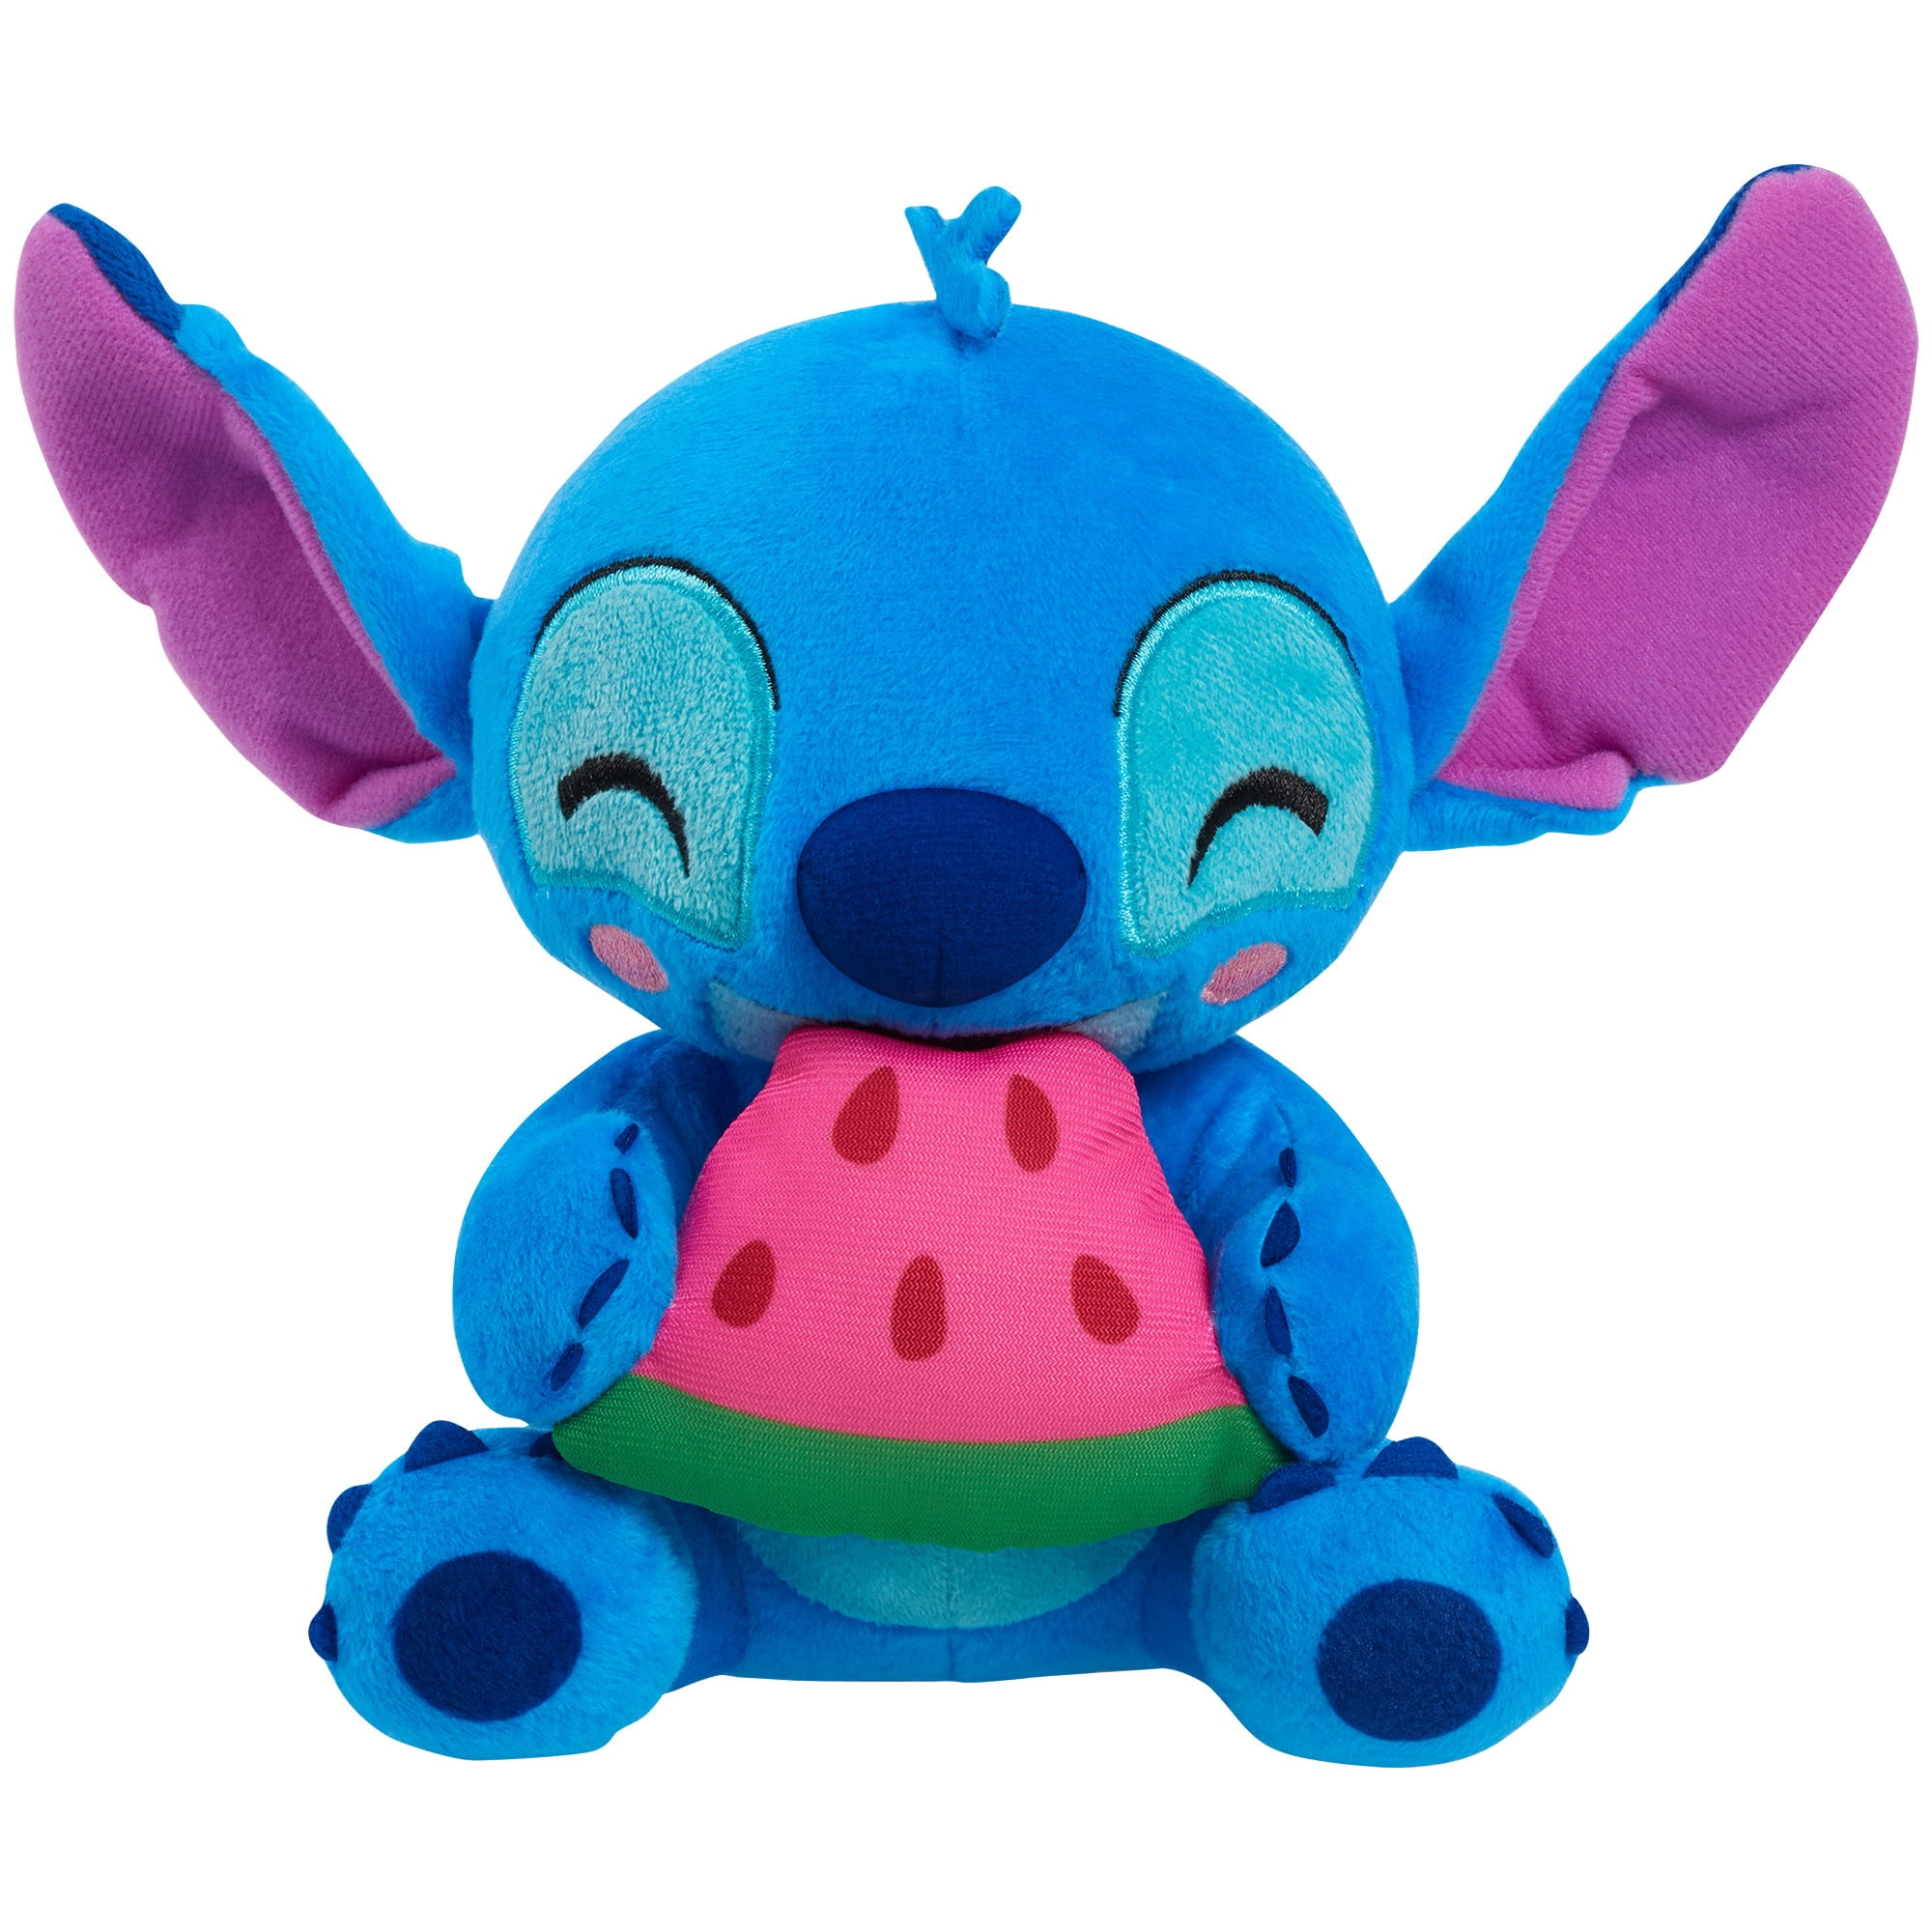 Disney Stitch Plush Easter Bunny, Small 9 1/2 inch, for Boys and Girls, Squishy Animals, Perfect Easter Basket Stuffer or Spring Decor, Suitable for